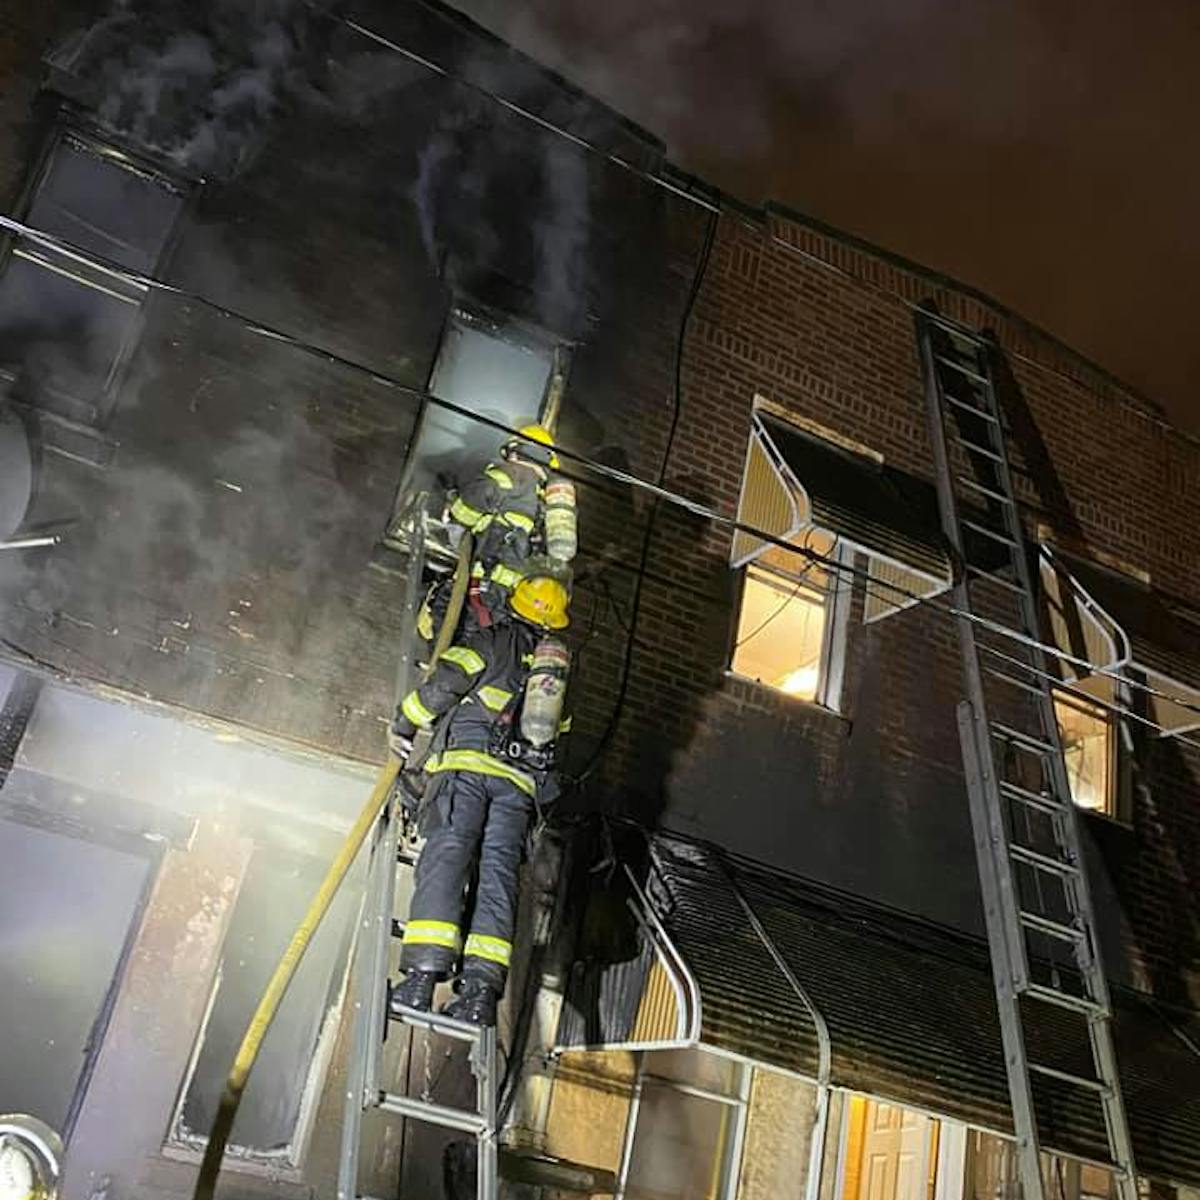 A firefighter was burned battling a blaze that erupted at a two-story row house in South Philadelphia on Sunday.